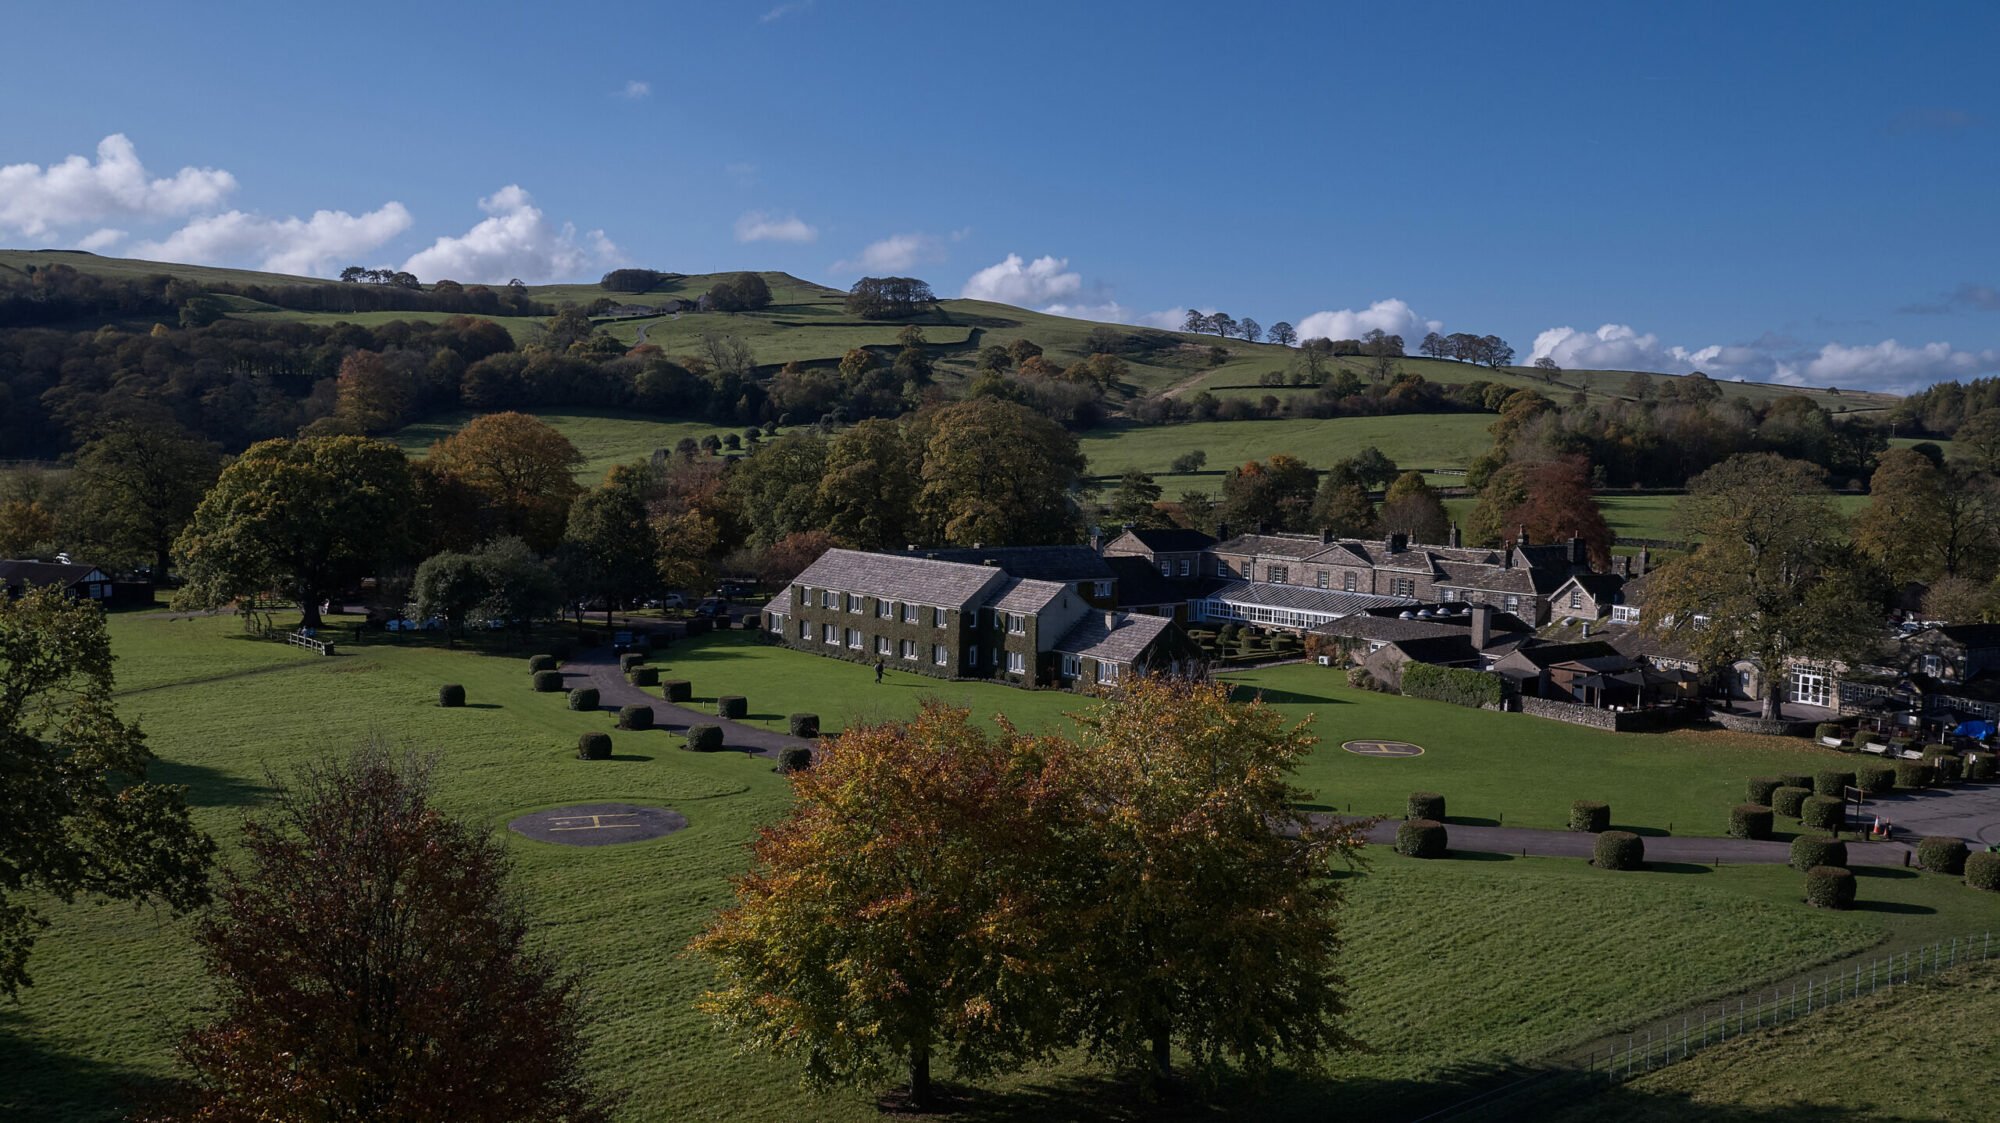 Image name The Devonshire Arms Hotel Spa ariel view summer view autumn view Yorkshire Dales Bolton Abbey Wedding venue countryside 2 1 scaled the 3 image from the post The Devonshire Arms Hotel & Spa in Yorkshire.com.